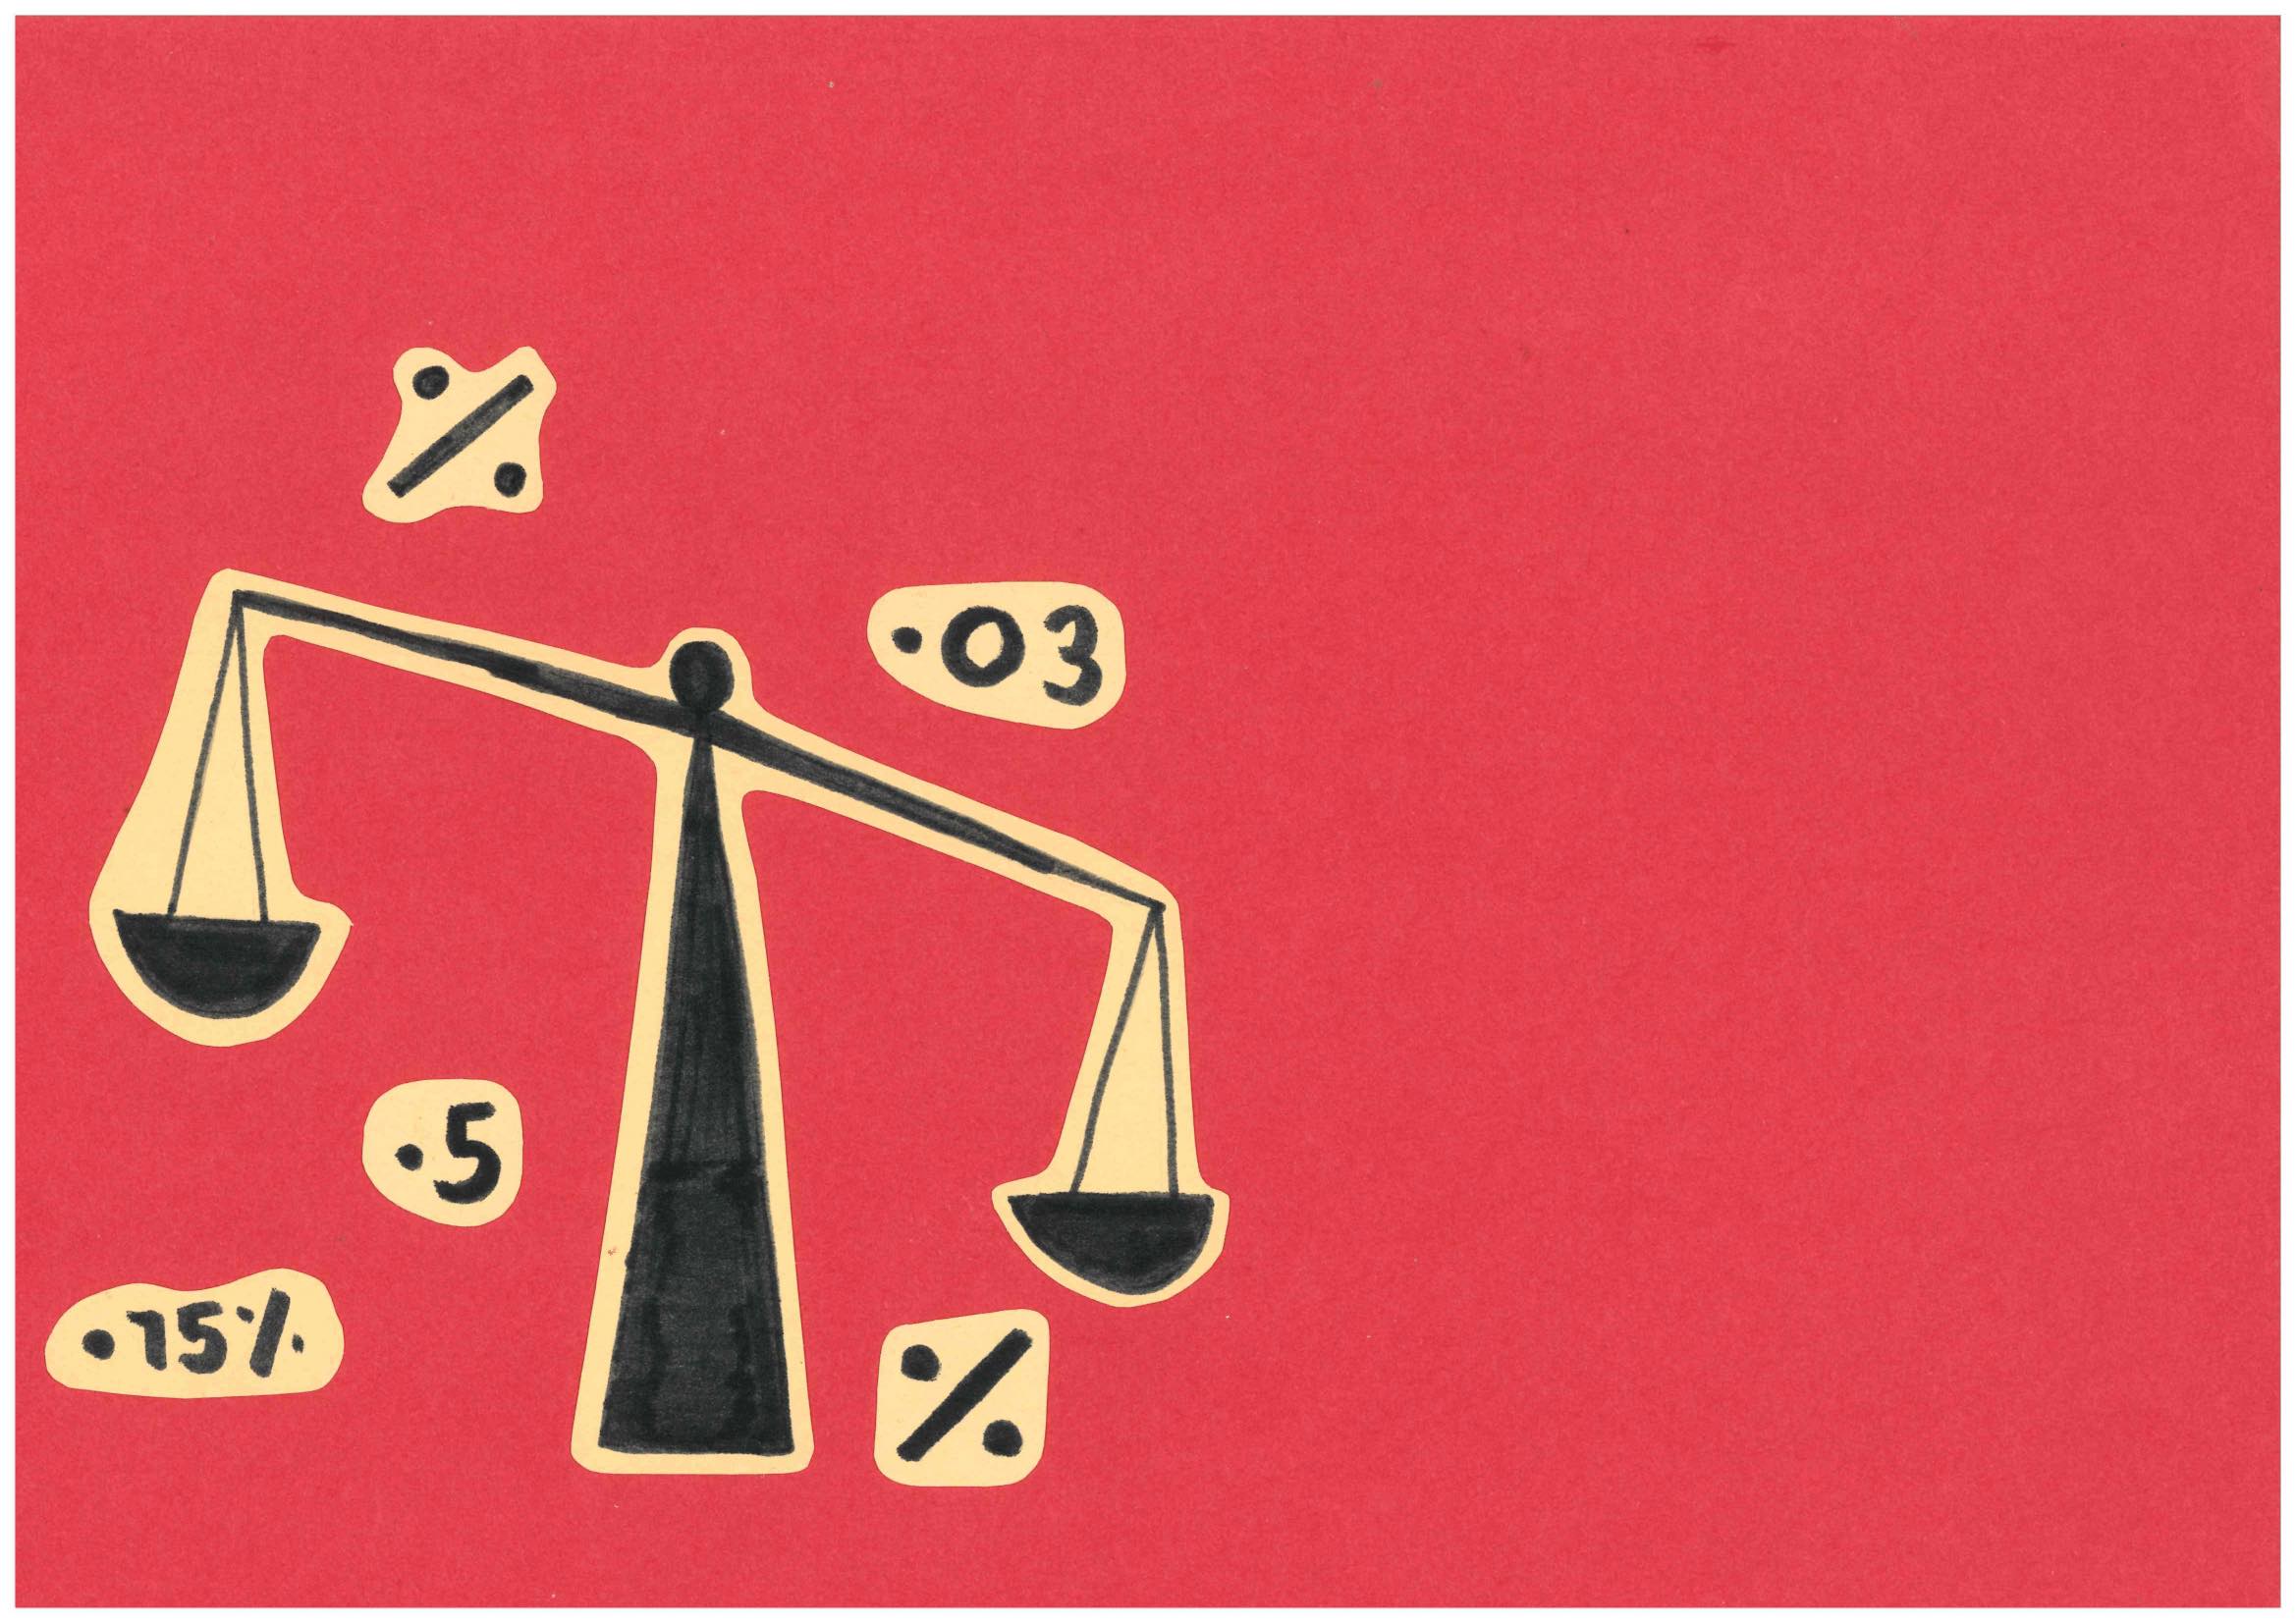 An illustration of a weighing scale is surrounded by statistics, against a red background.